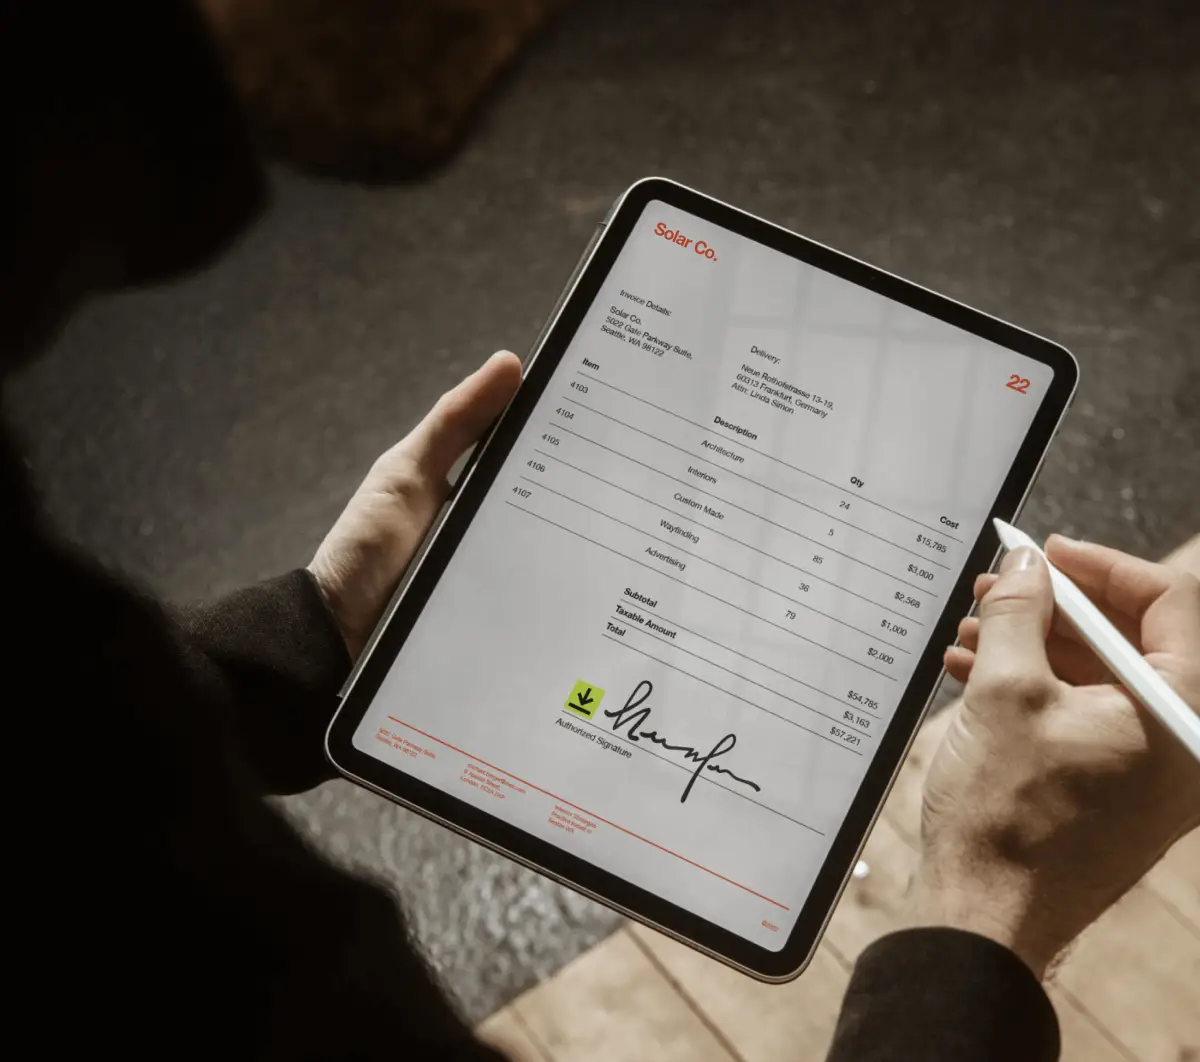 A solar manufacturing company uses DocuSign eSignature on a tablet to sign an invoice.